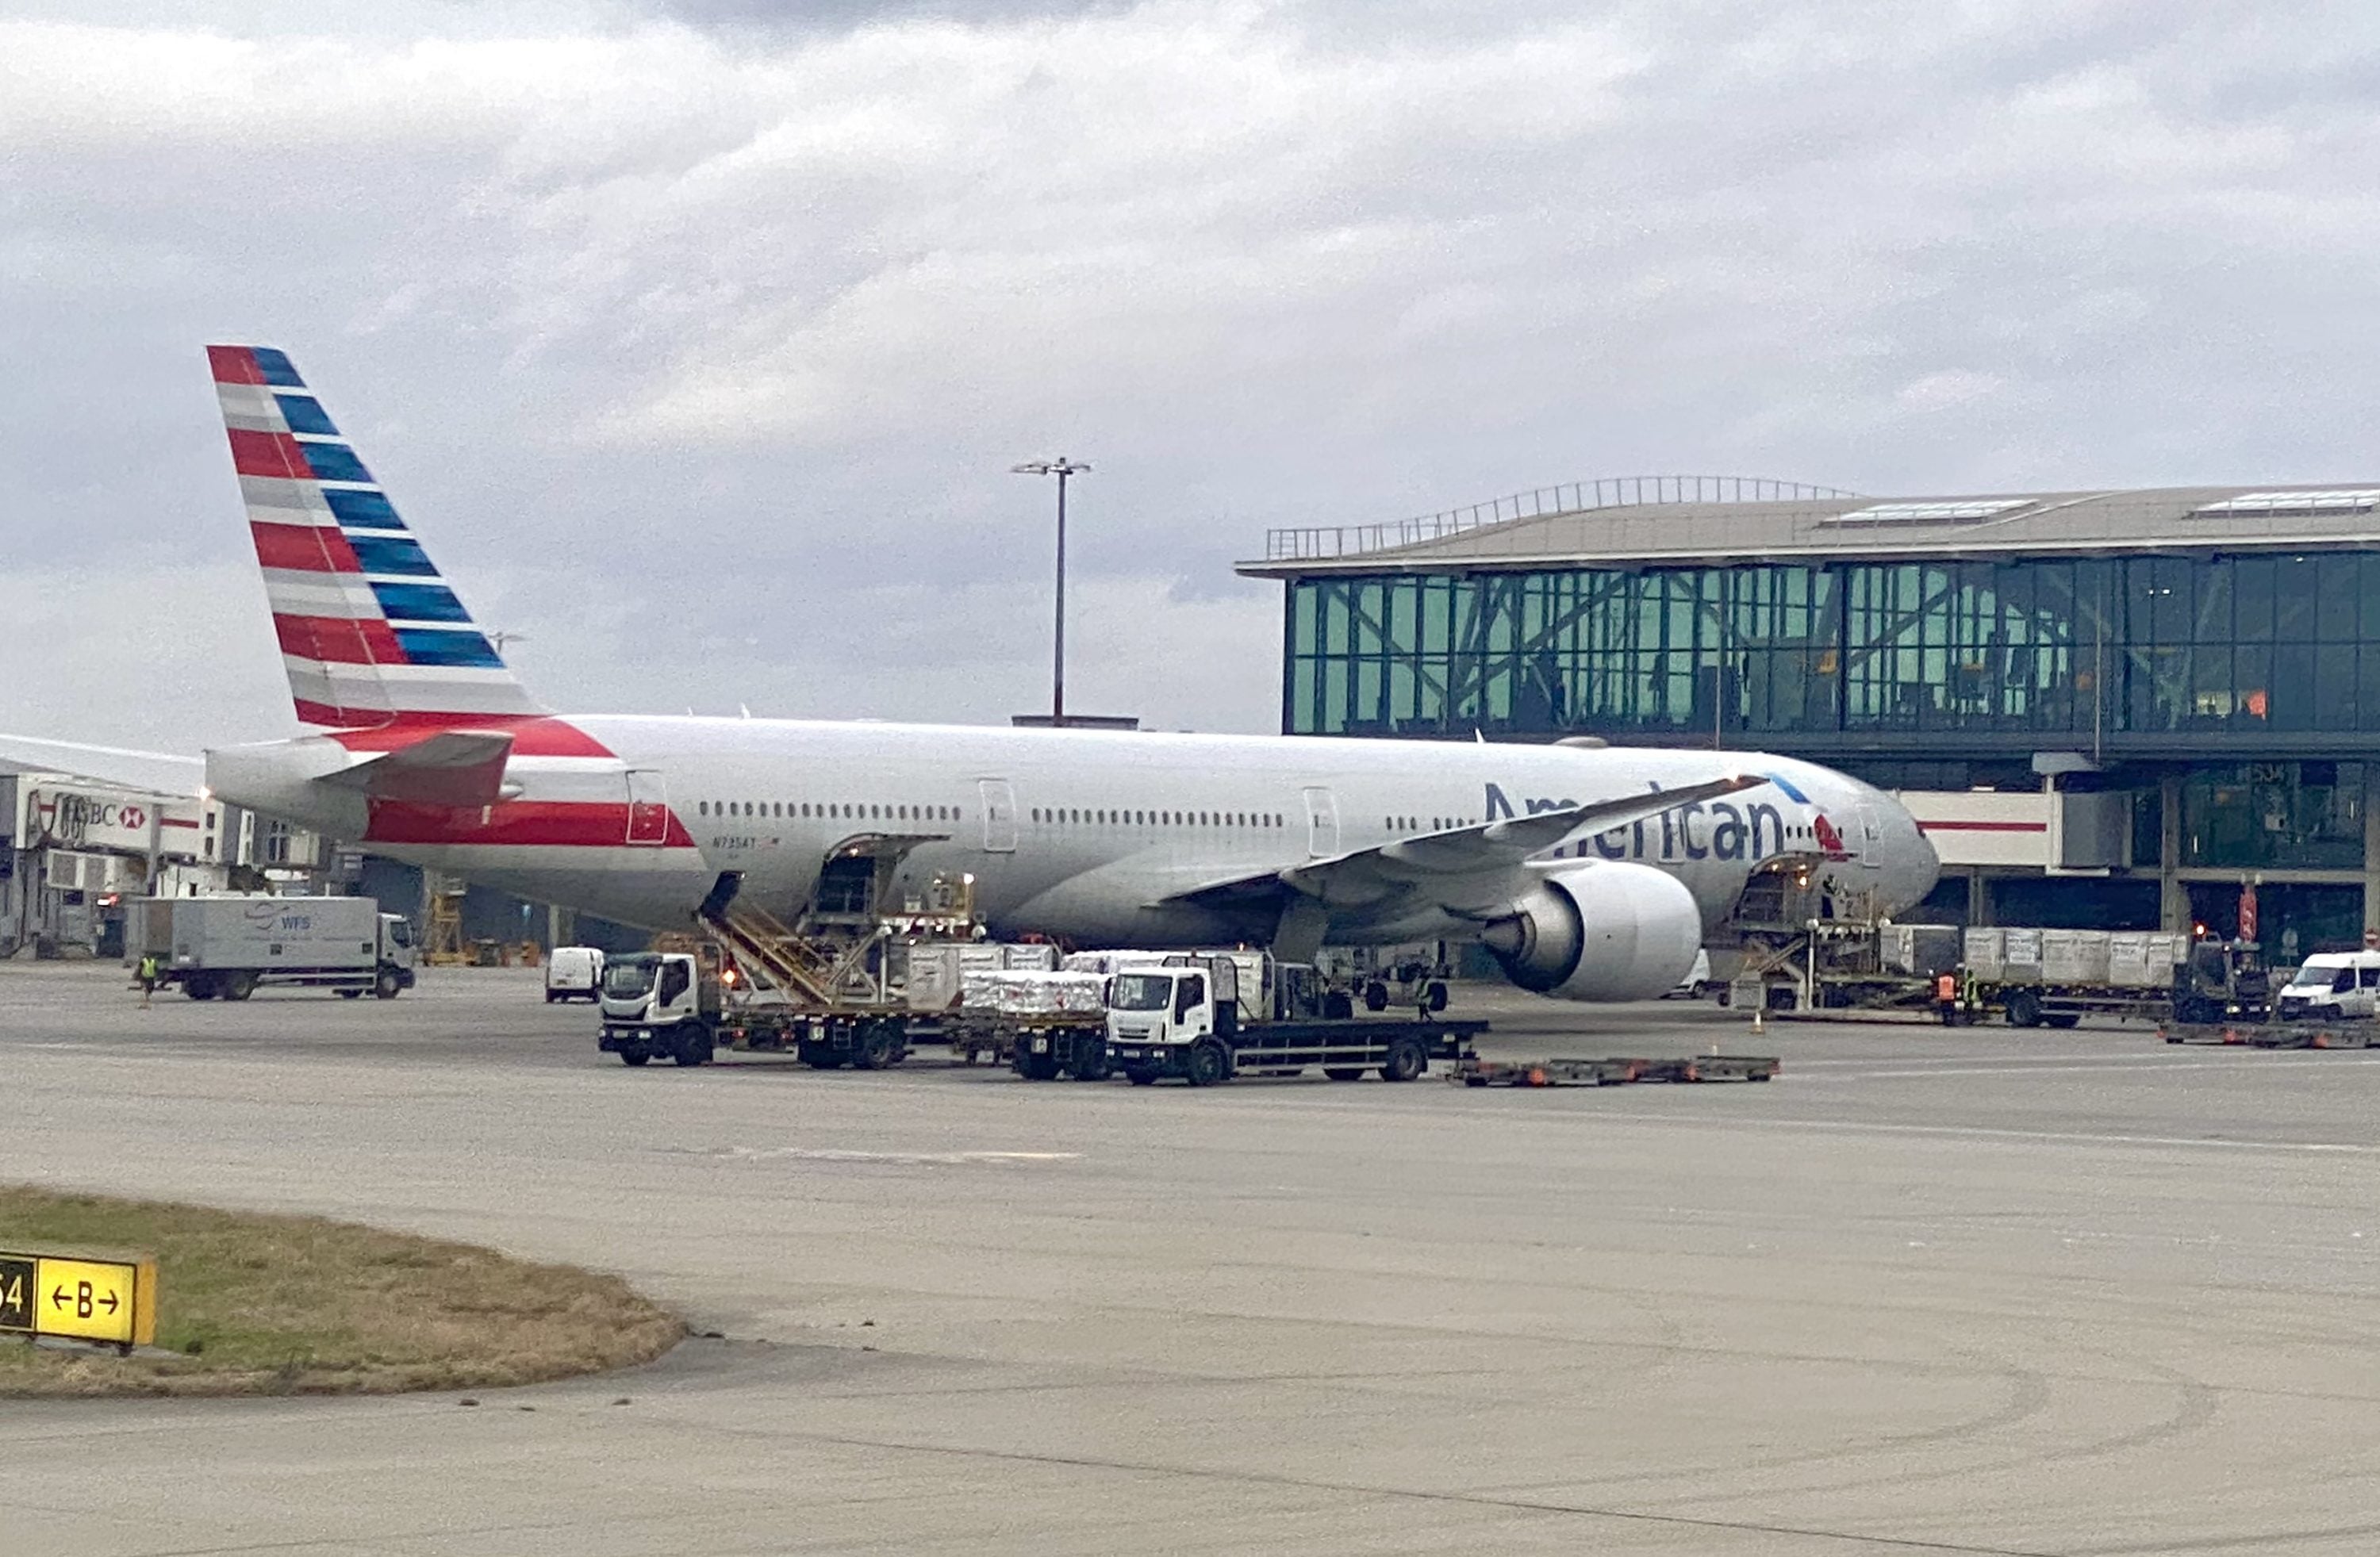 American Airlines Boeing 777 at Heathrow Terminal 5